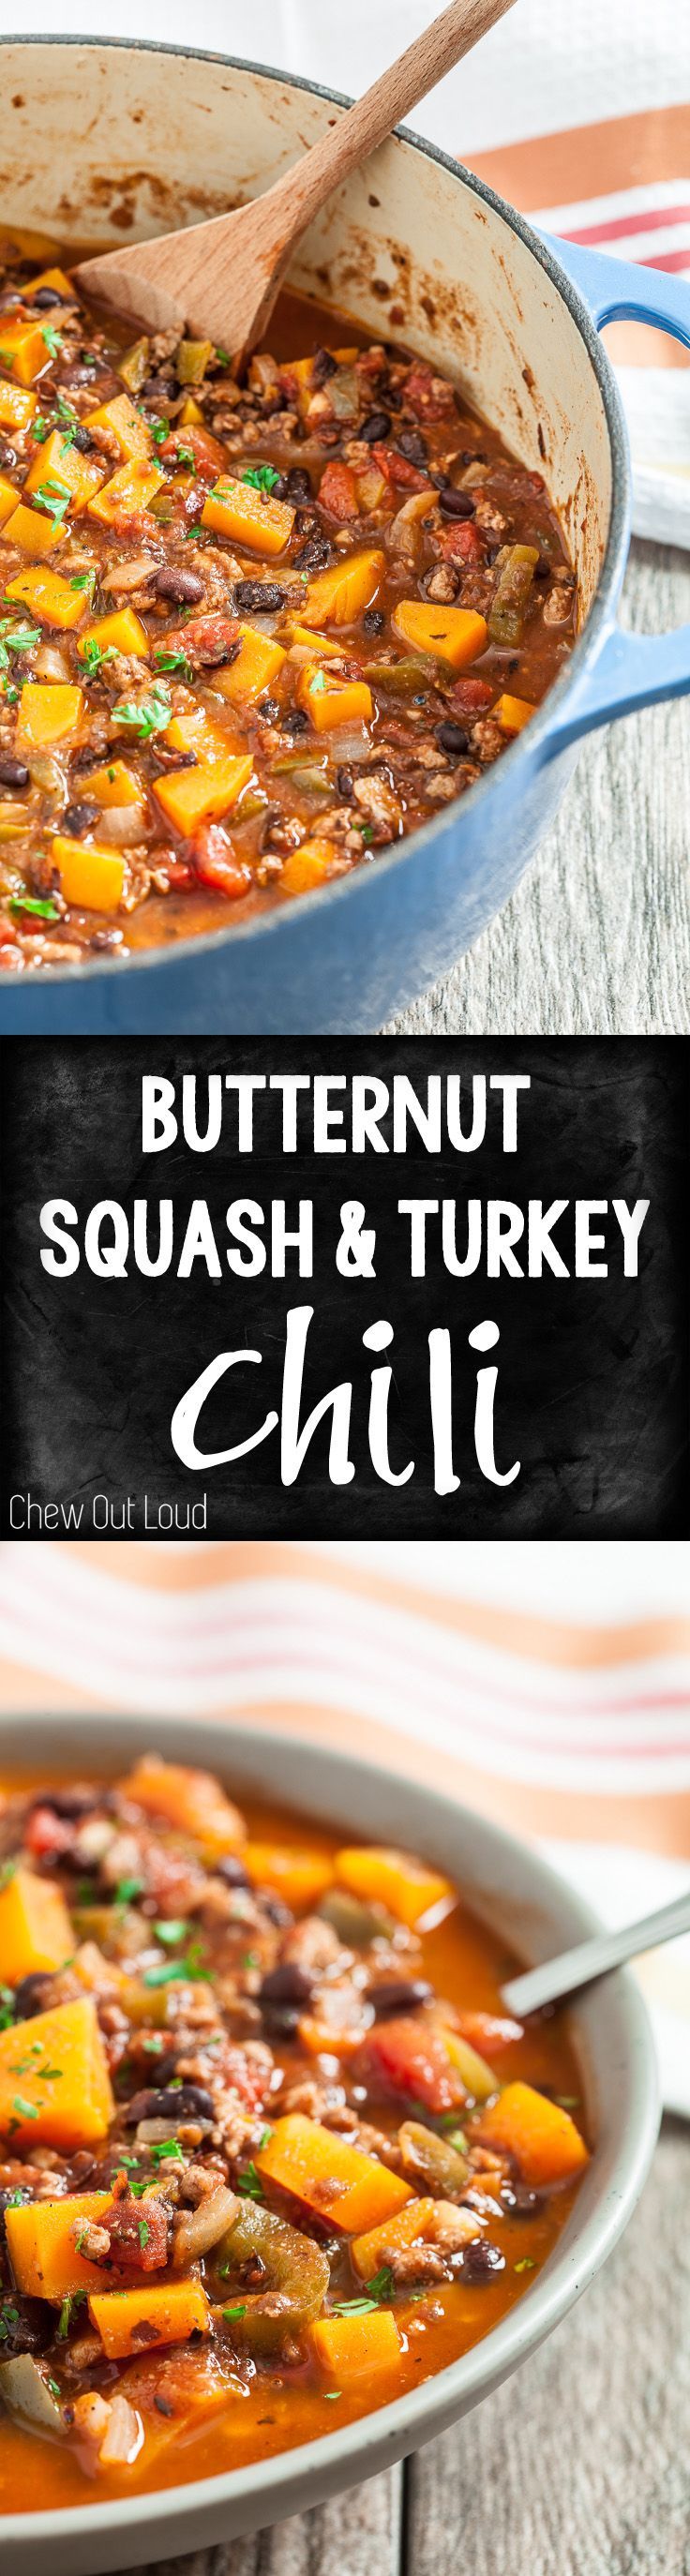 Hearty, healthy, and mouthwatering Butternut Squash & Turkey Chili. So flavorful and comforting. #chili